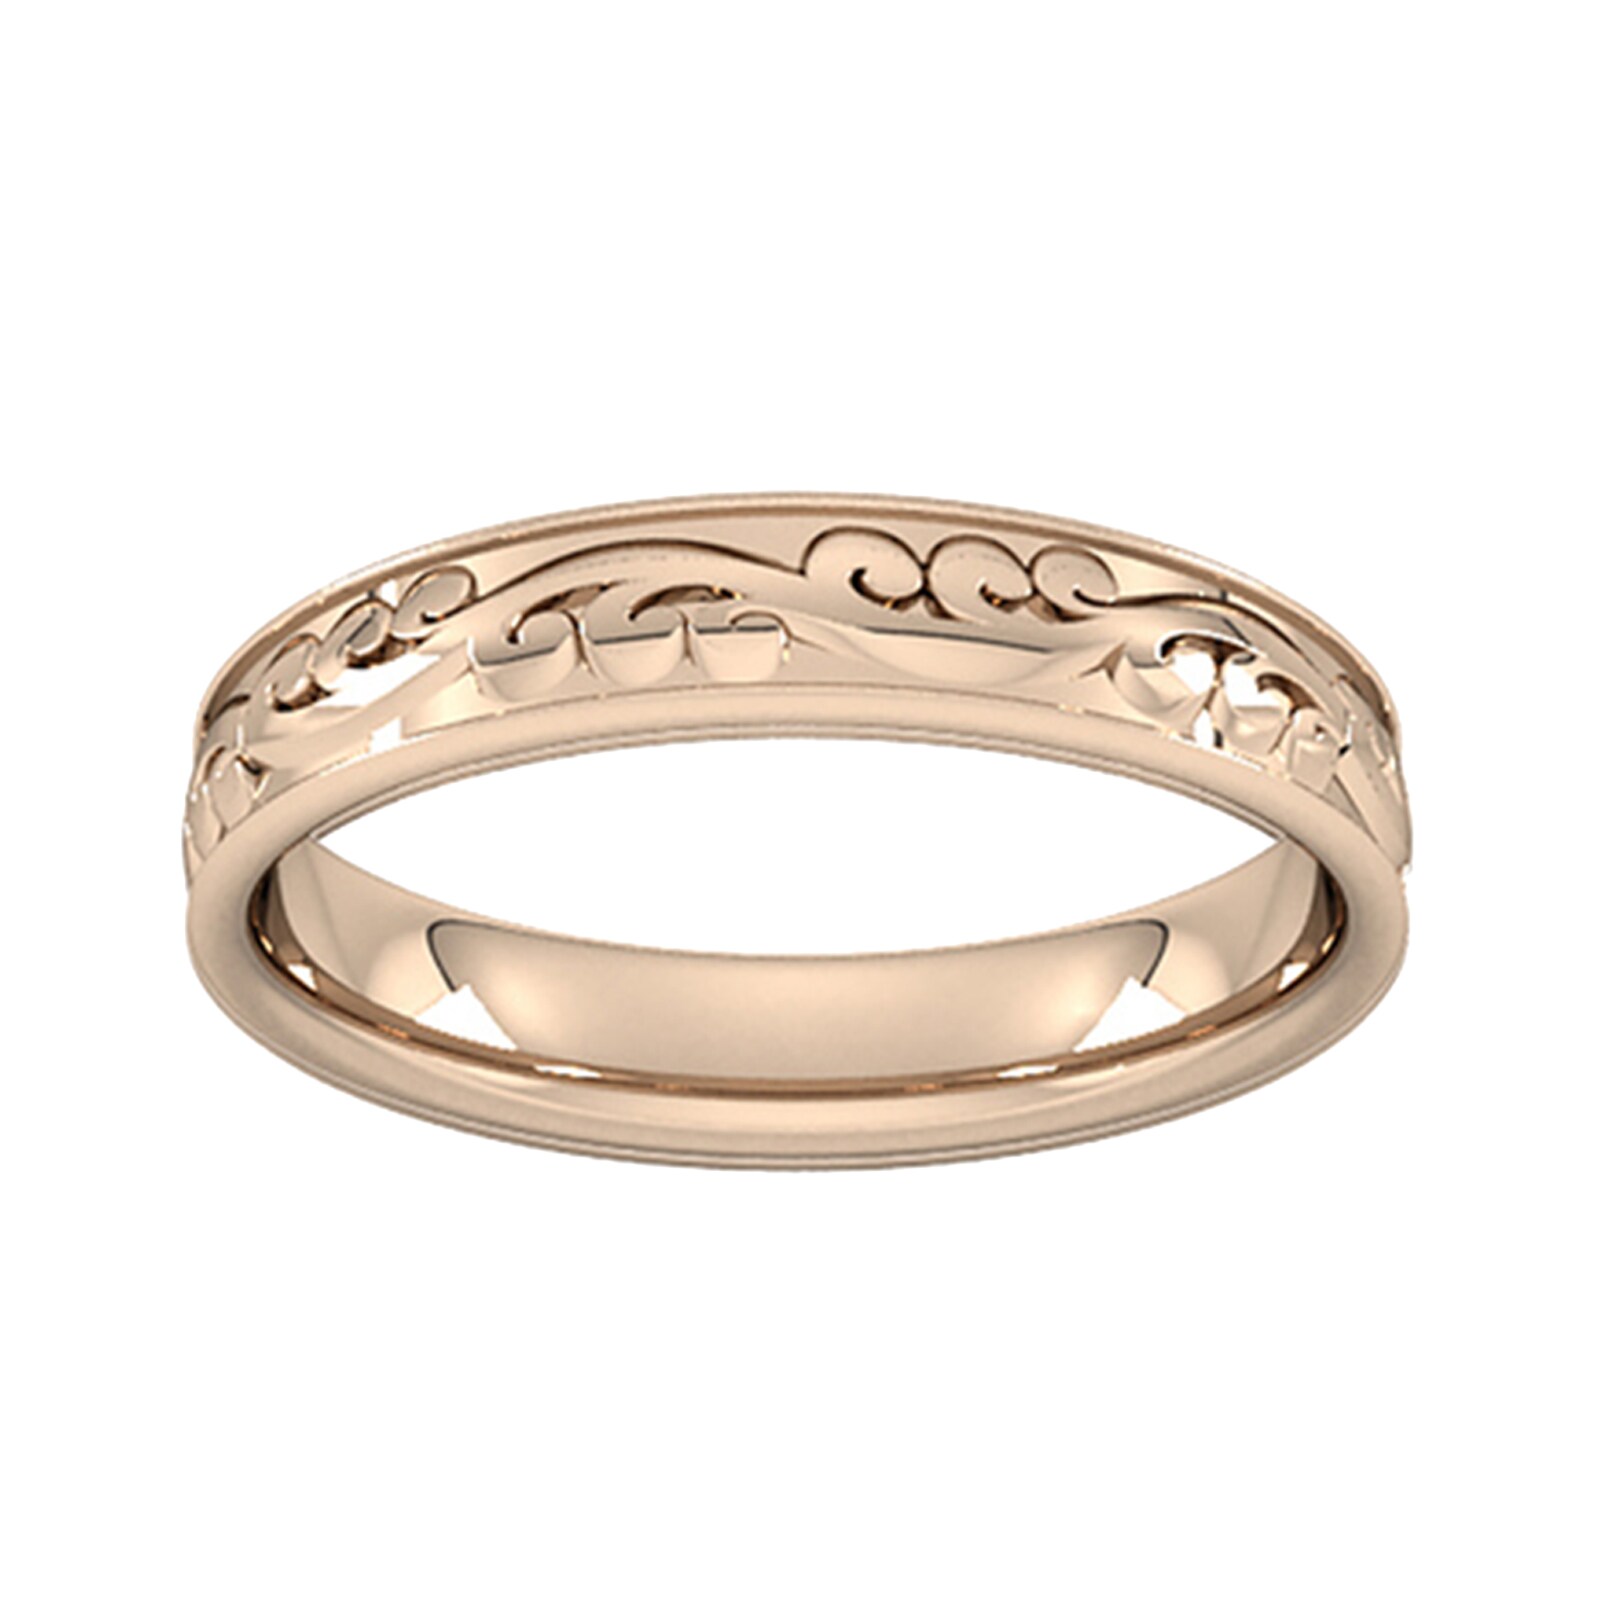 4mm Hand Engraved Wedding Ring In 18 Carat Rose Gold - Ring Size W